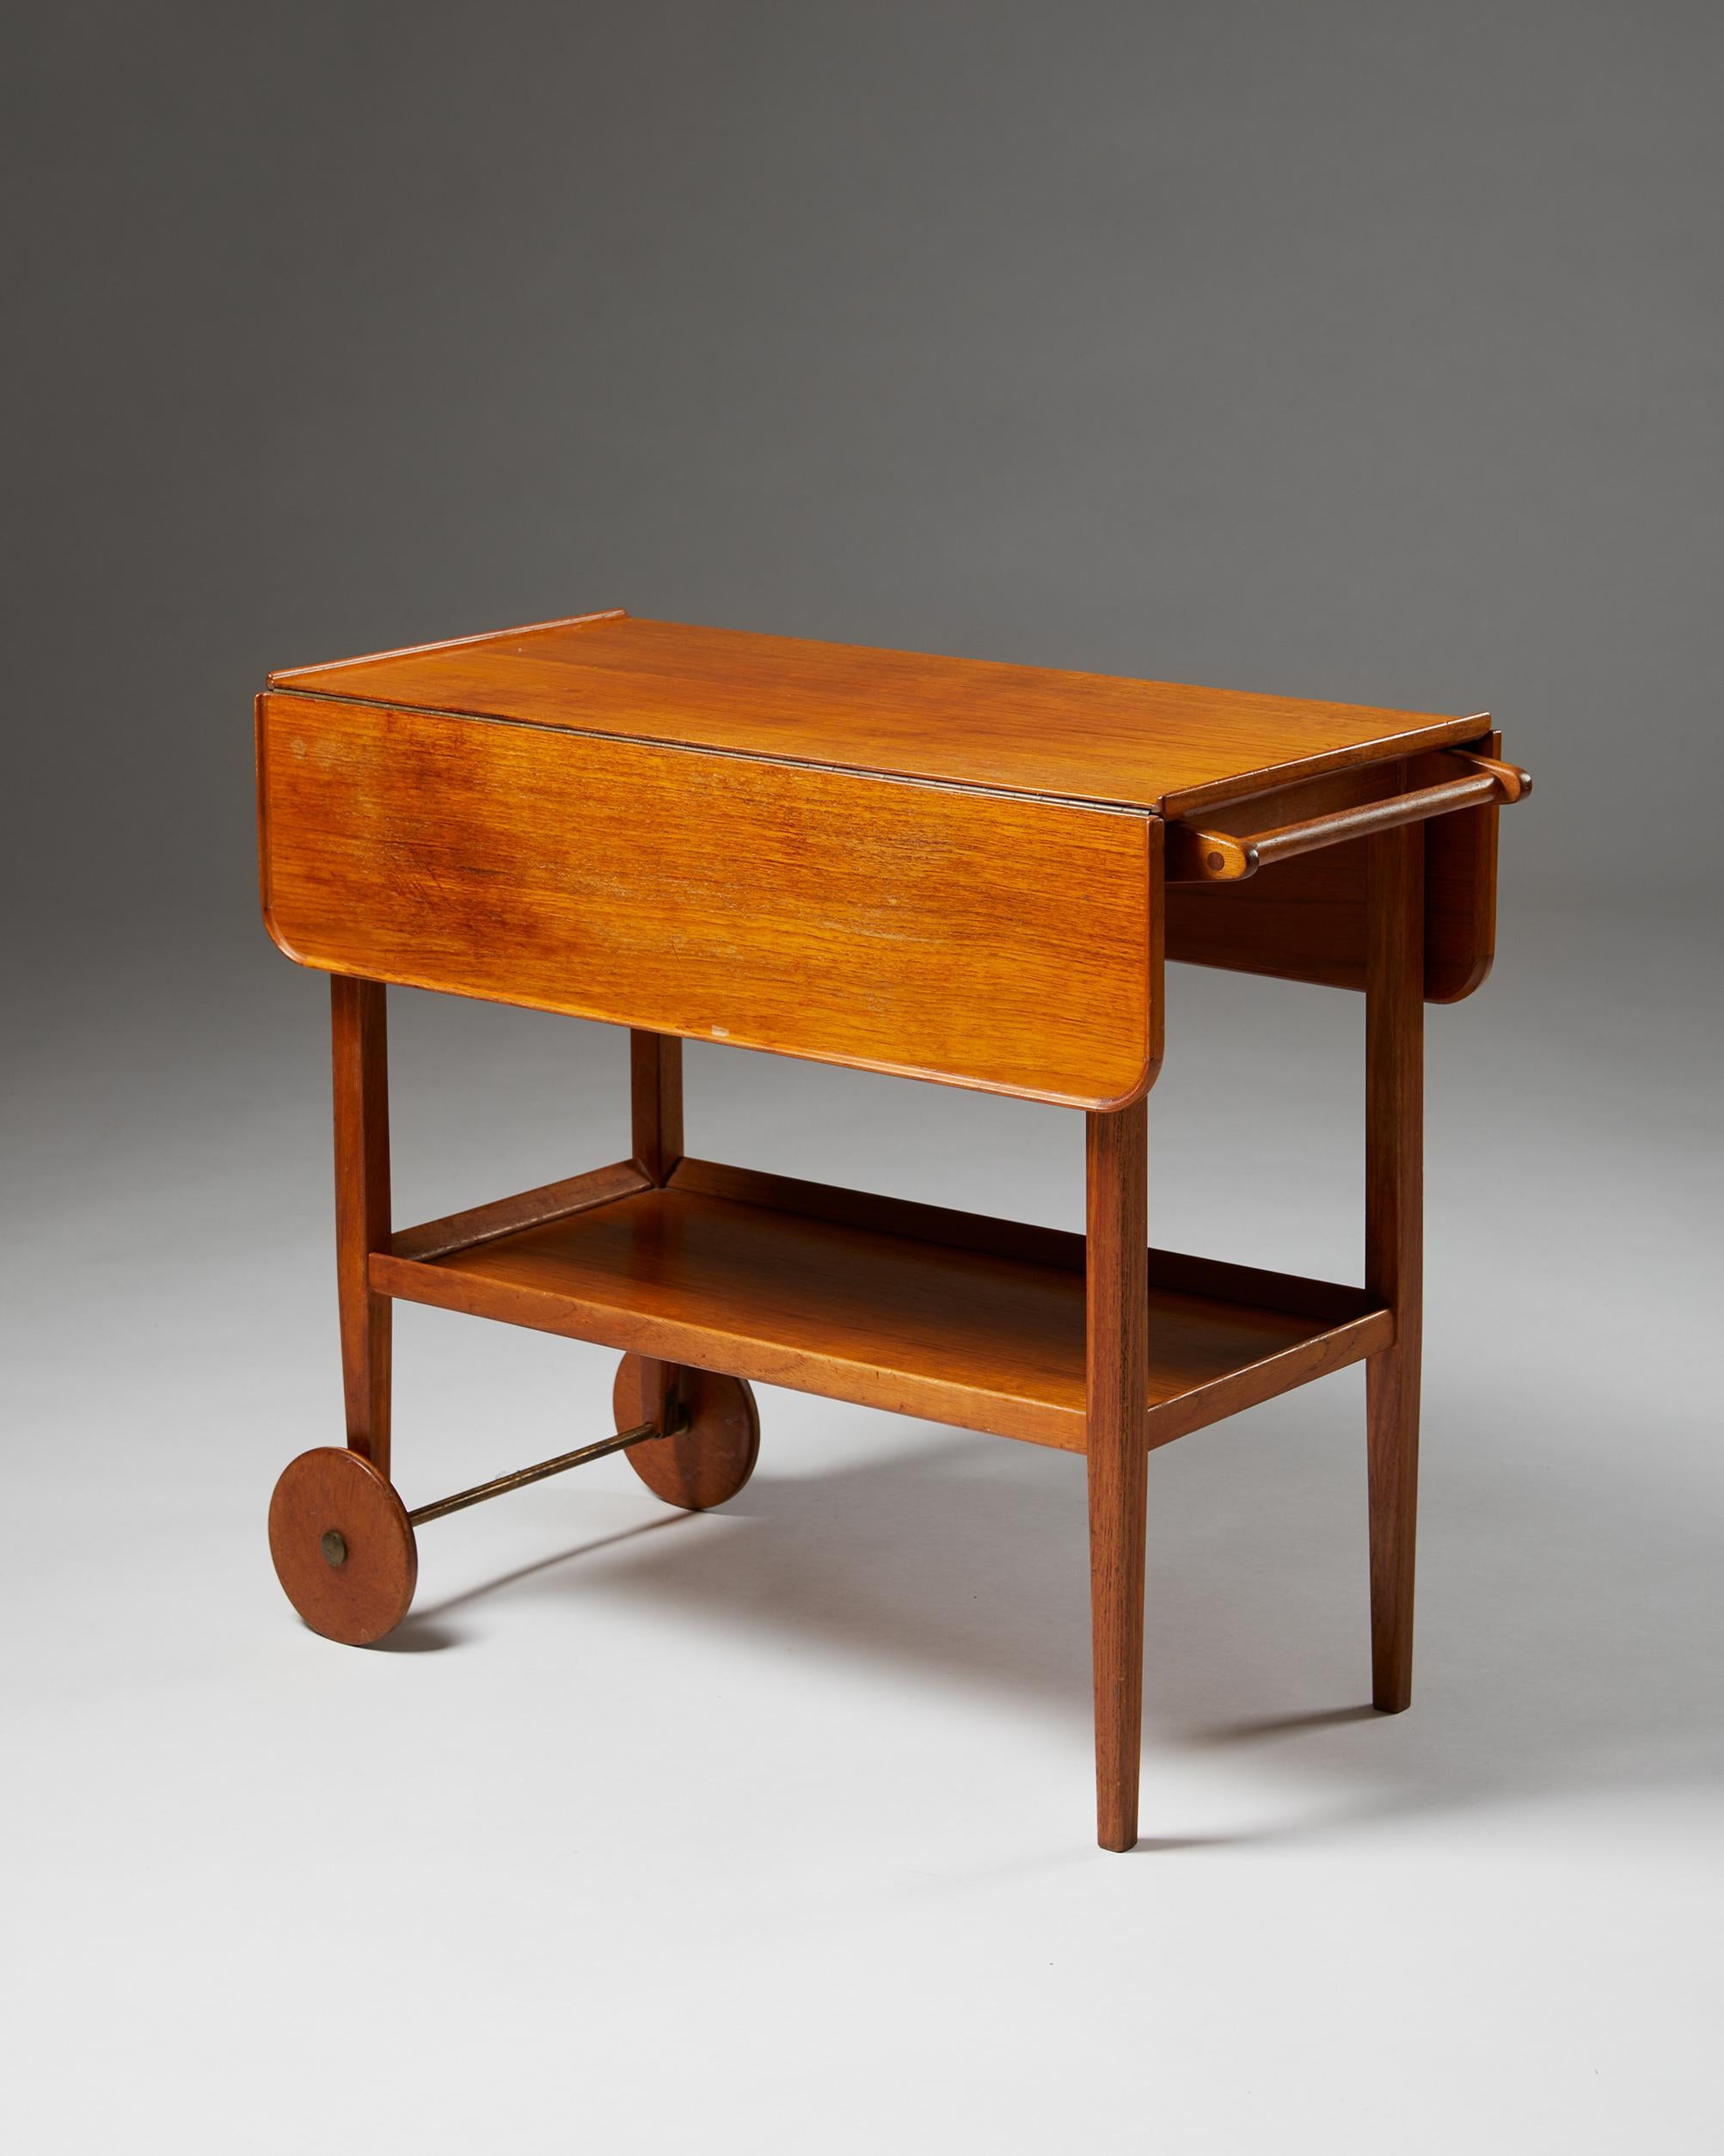 Serving trolley, anonymous, Sweden. 1950s.

Teak.

Rotating top.

Dimensions:
L: 68.5 cm/ 2' 3